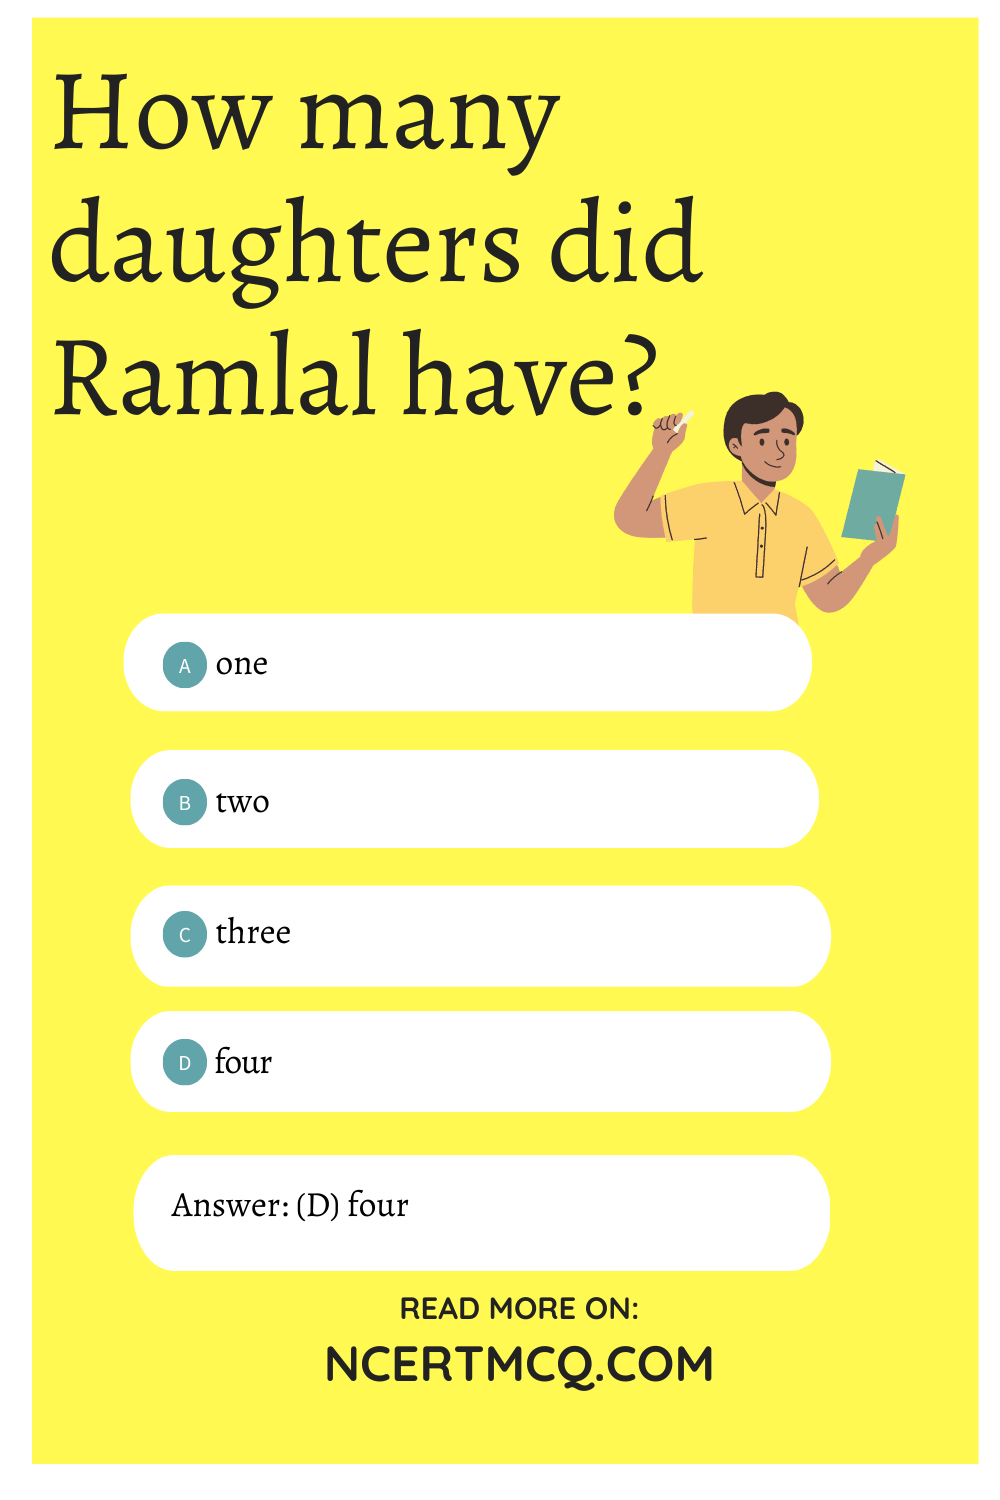 How many daughters did Ramlal have?